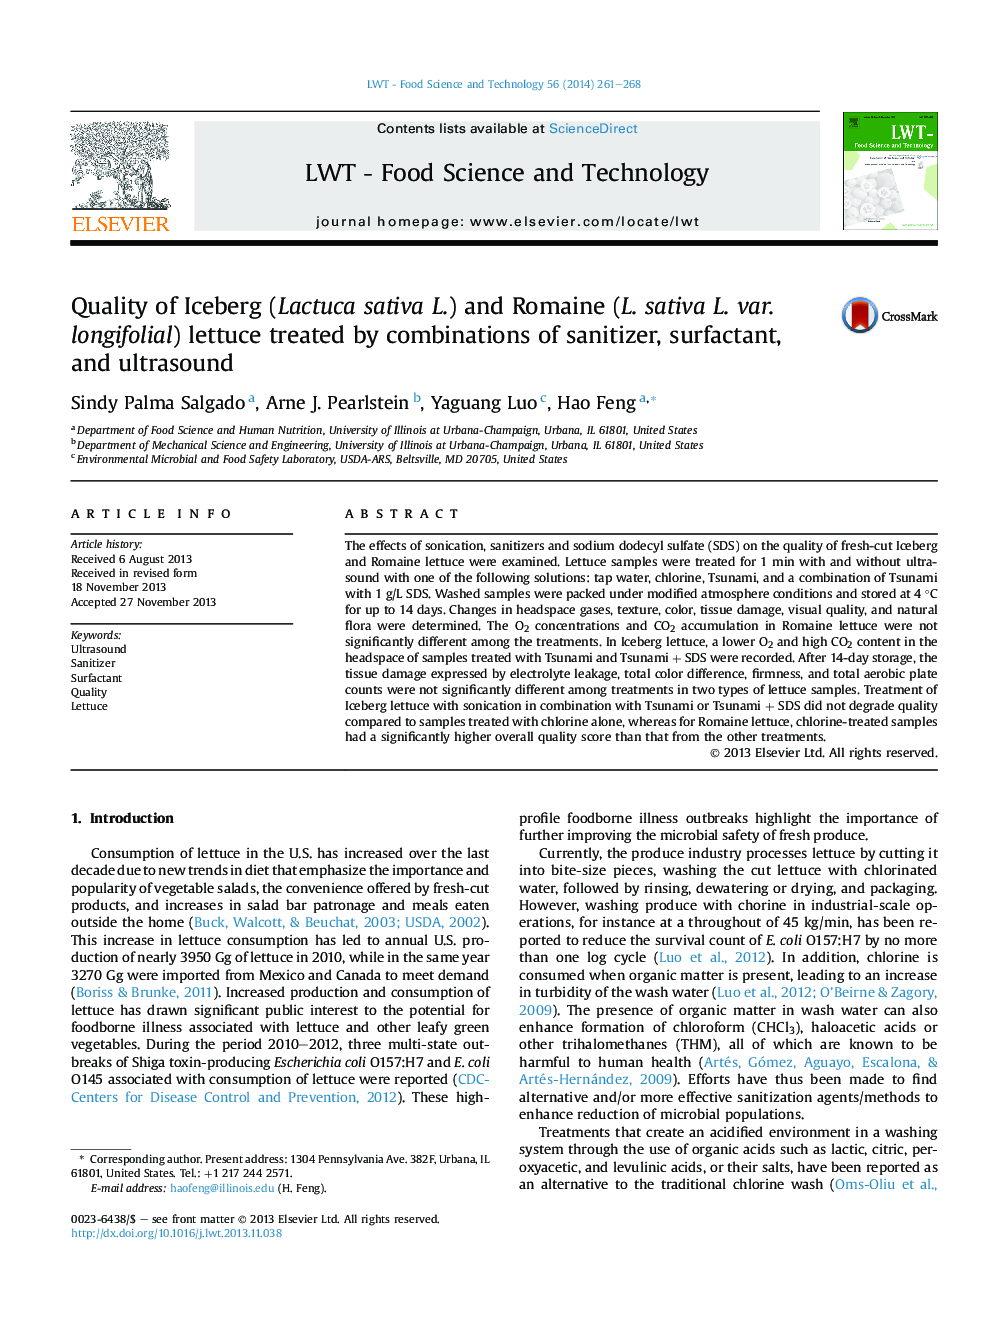 Quality of Iceberg (Lactuca sativa L.) and Romaine (L. sativa L. var. longifolial) lettuce treated by combinations of sanitizer, surfactant, and ultrasound